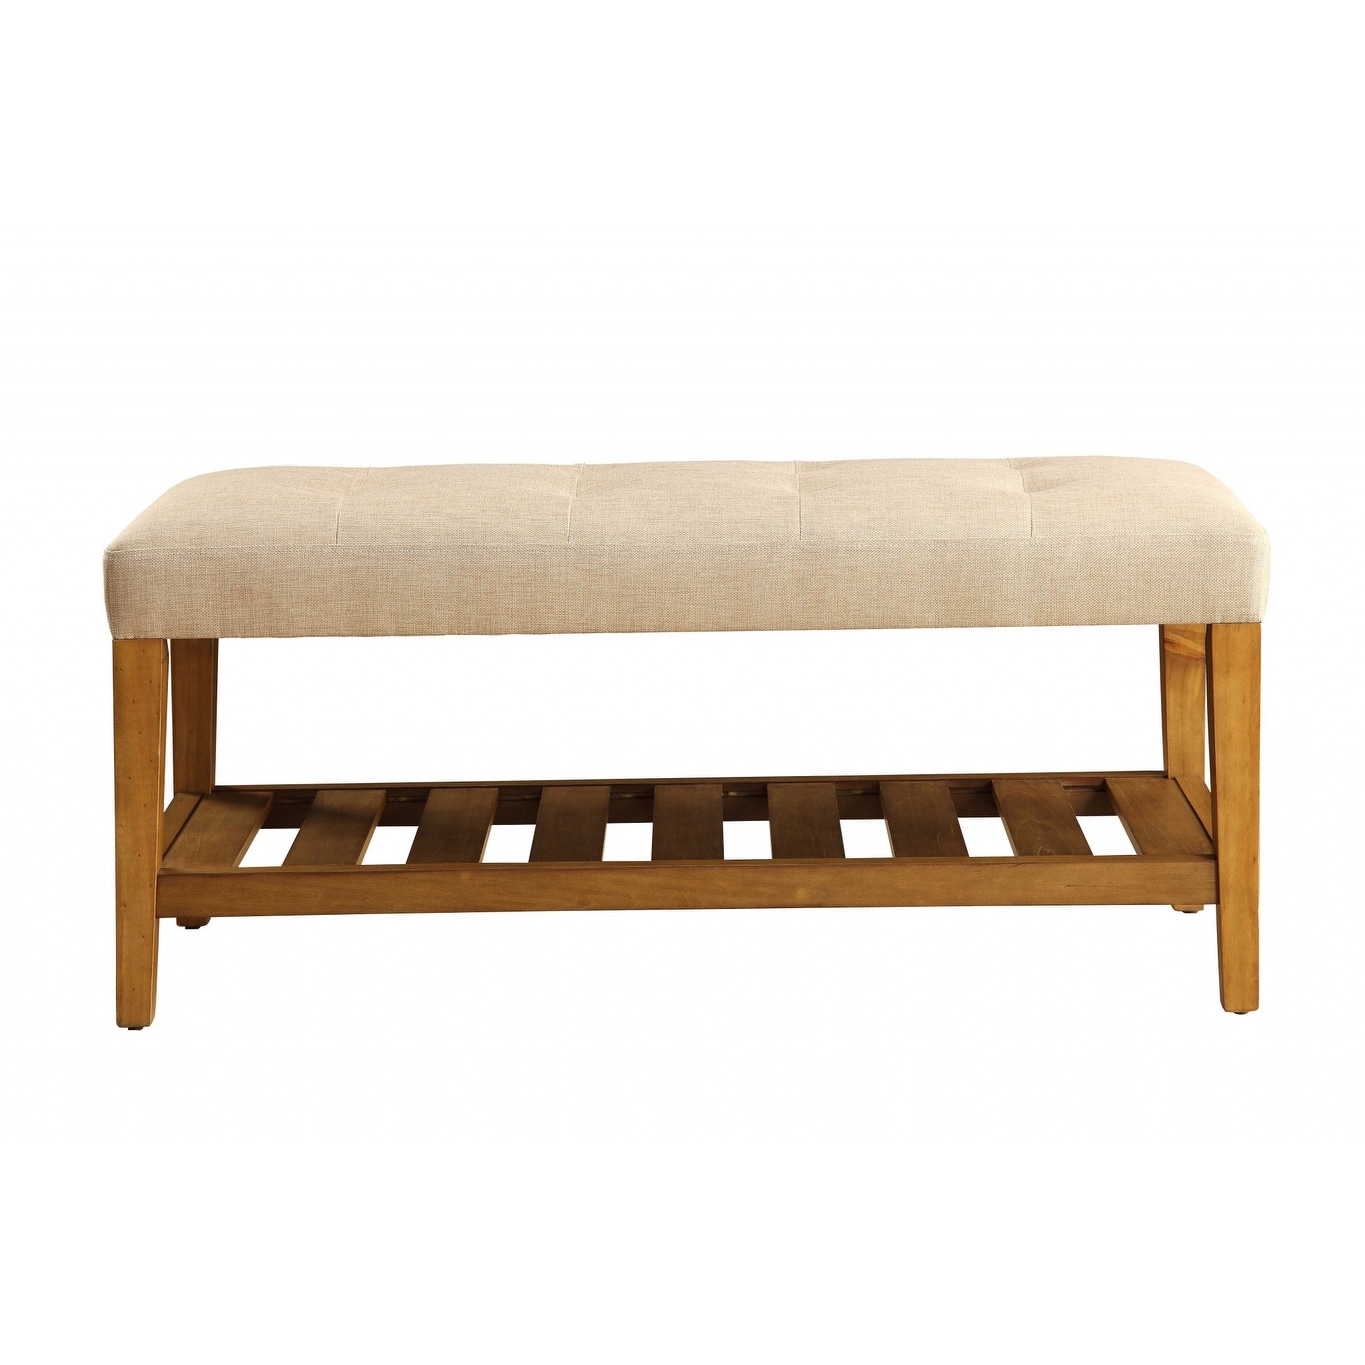 40' X 16' X 18' Beige And Oak Simple Bench